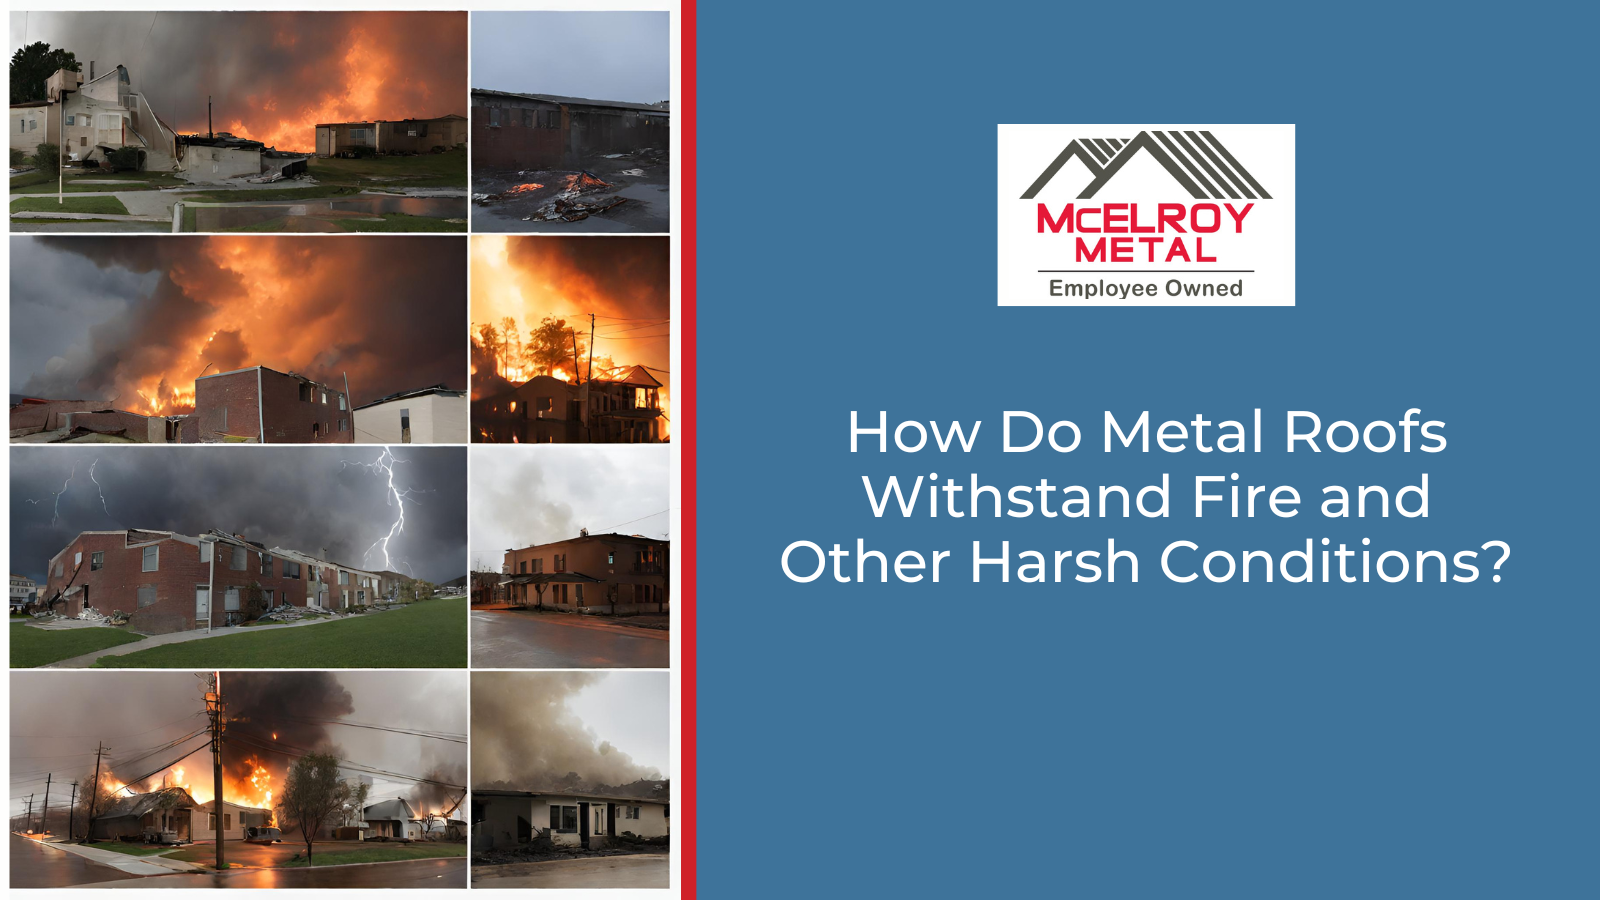 How Do Metal Roofs Withstand Fire and Other Harsh Conditions?